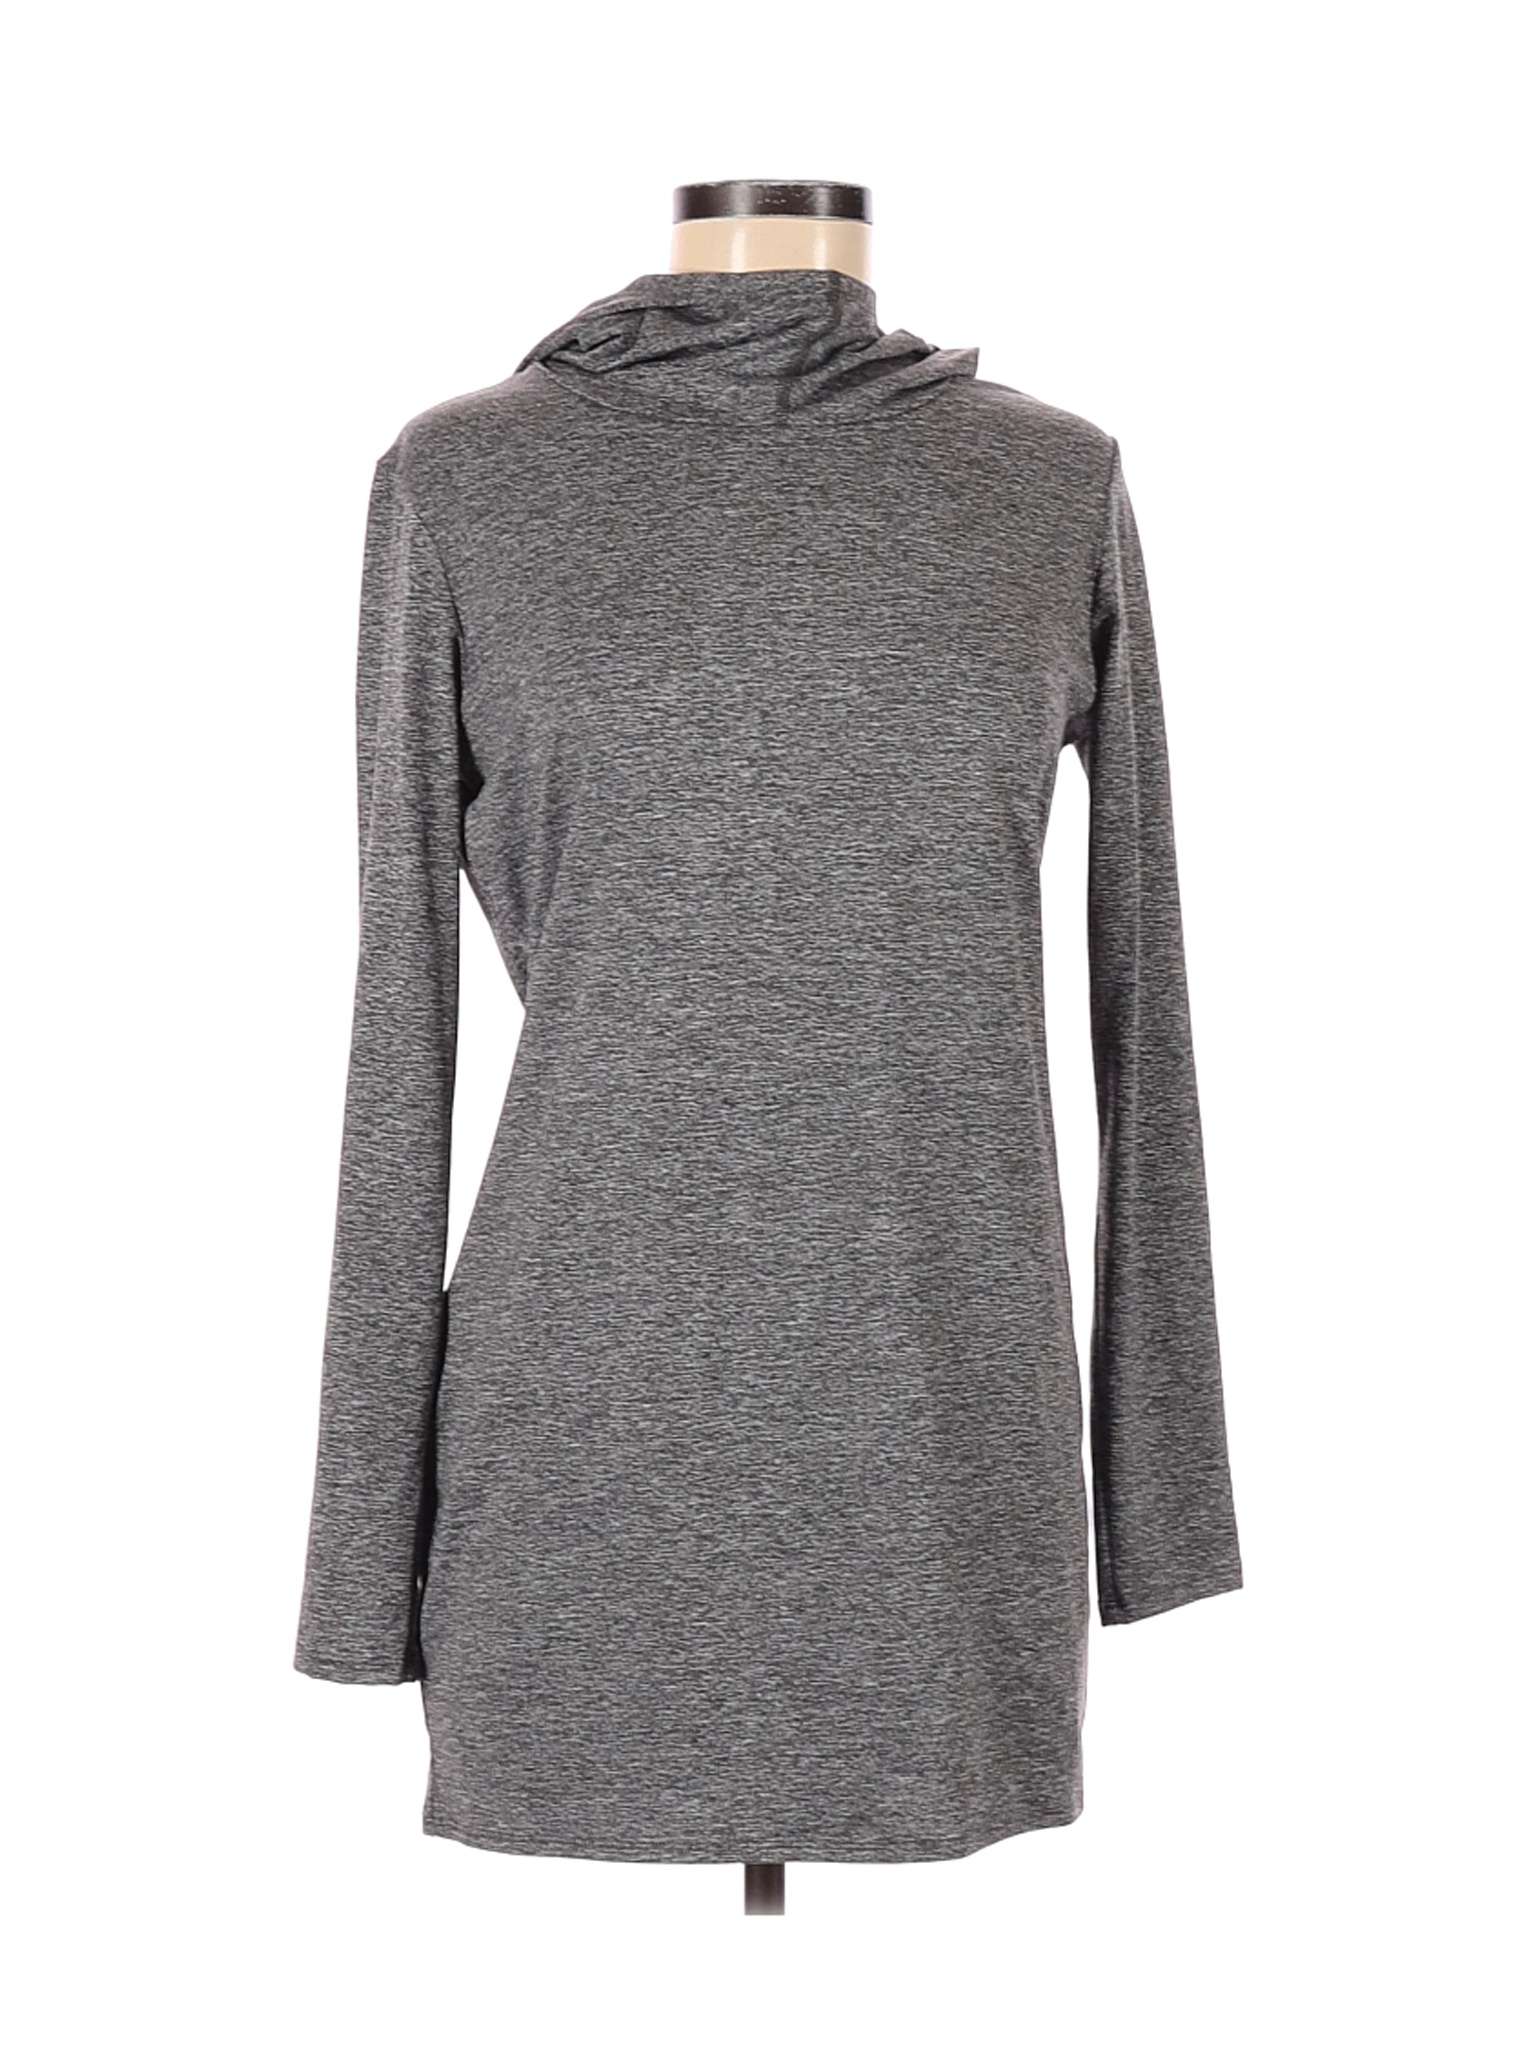 The North Face Women Gray Casual Dress M | eBay